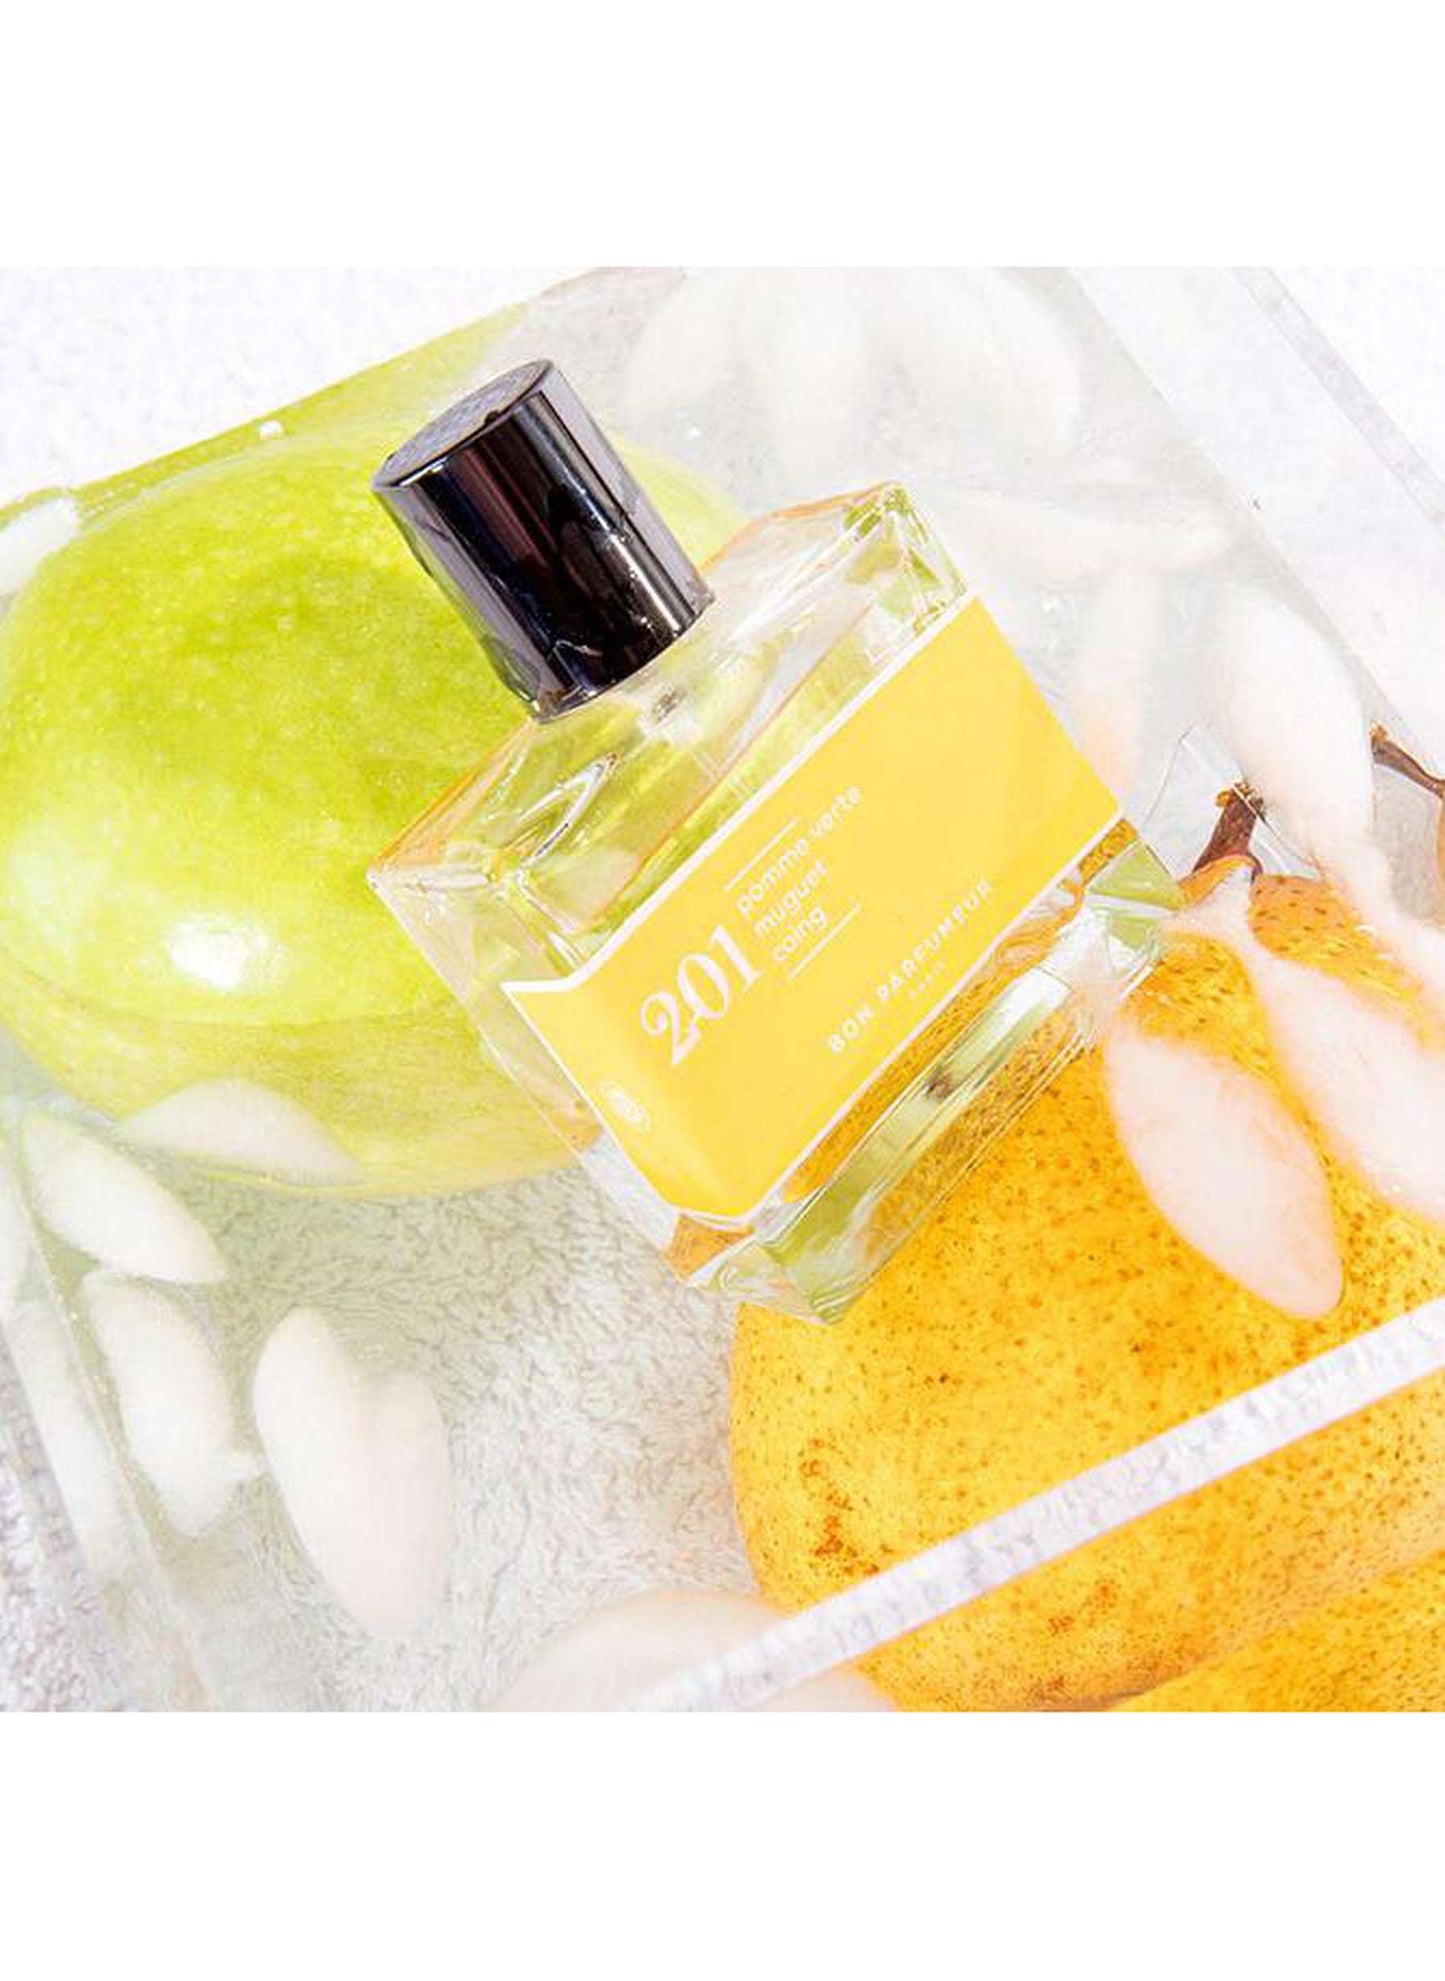 Eau de parfum 201: green apple, lily-of-the-valley and quince